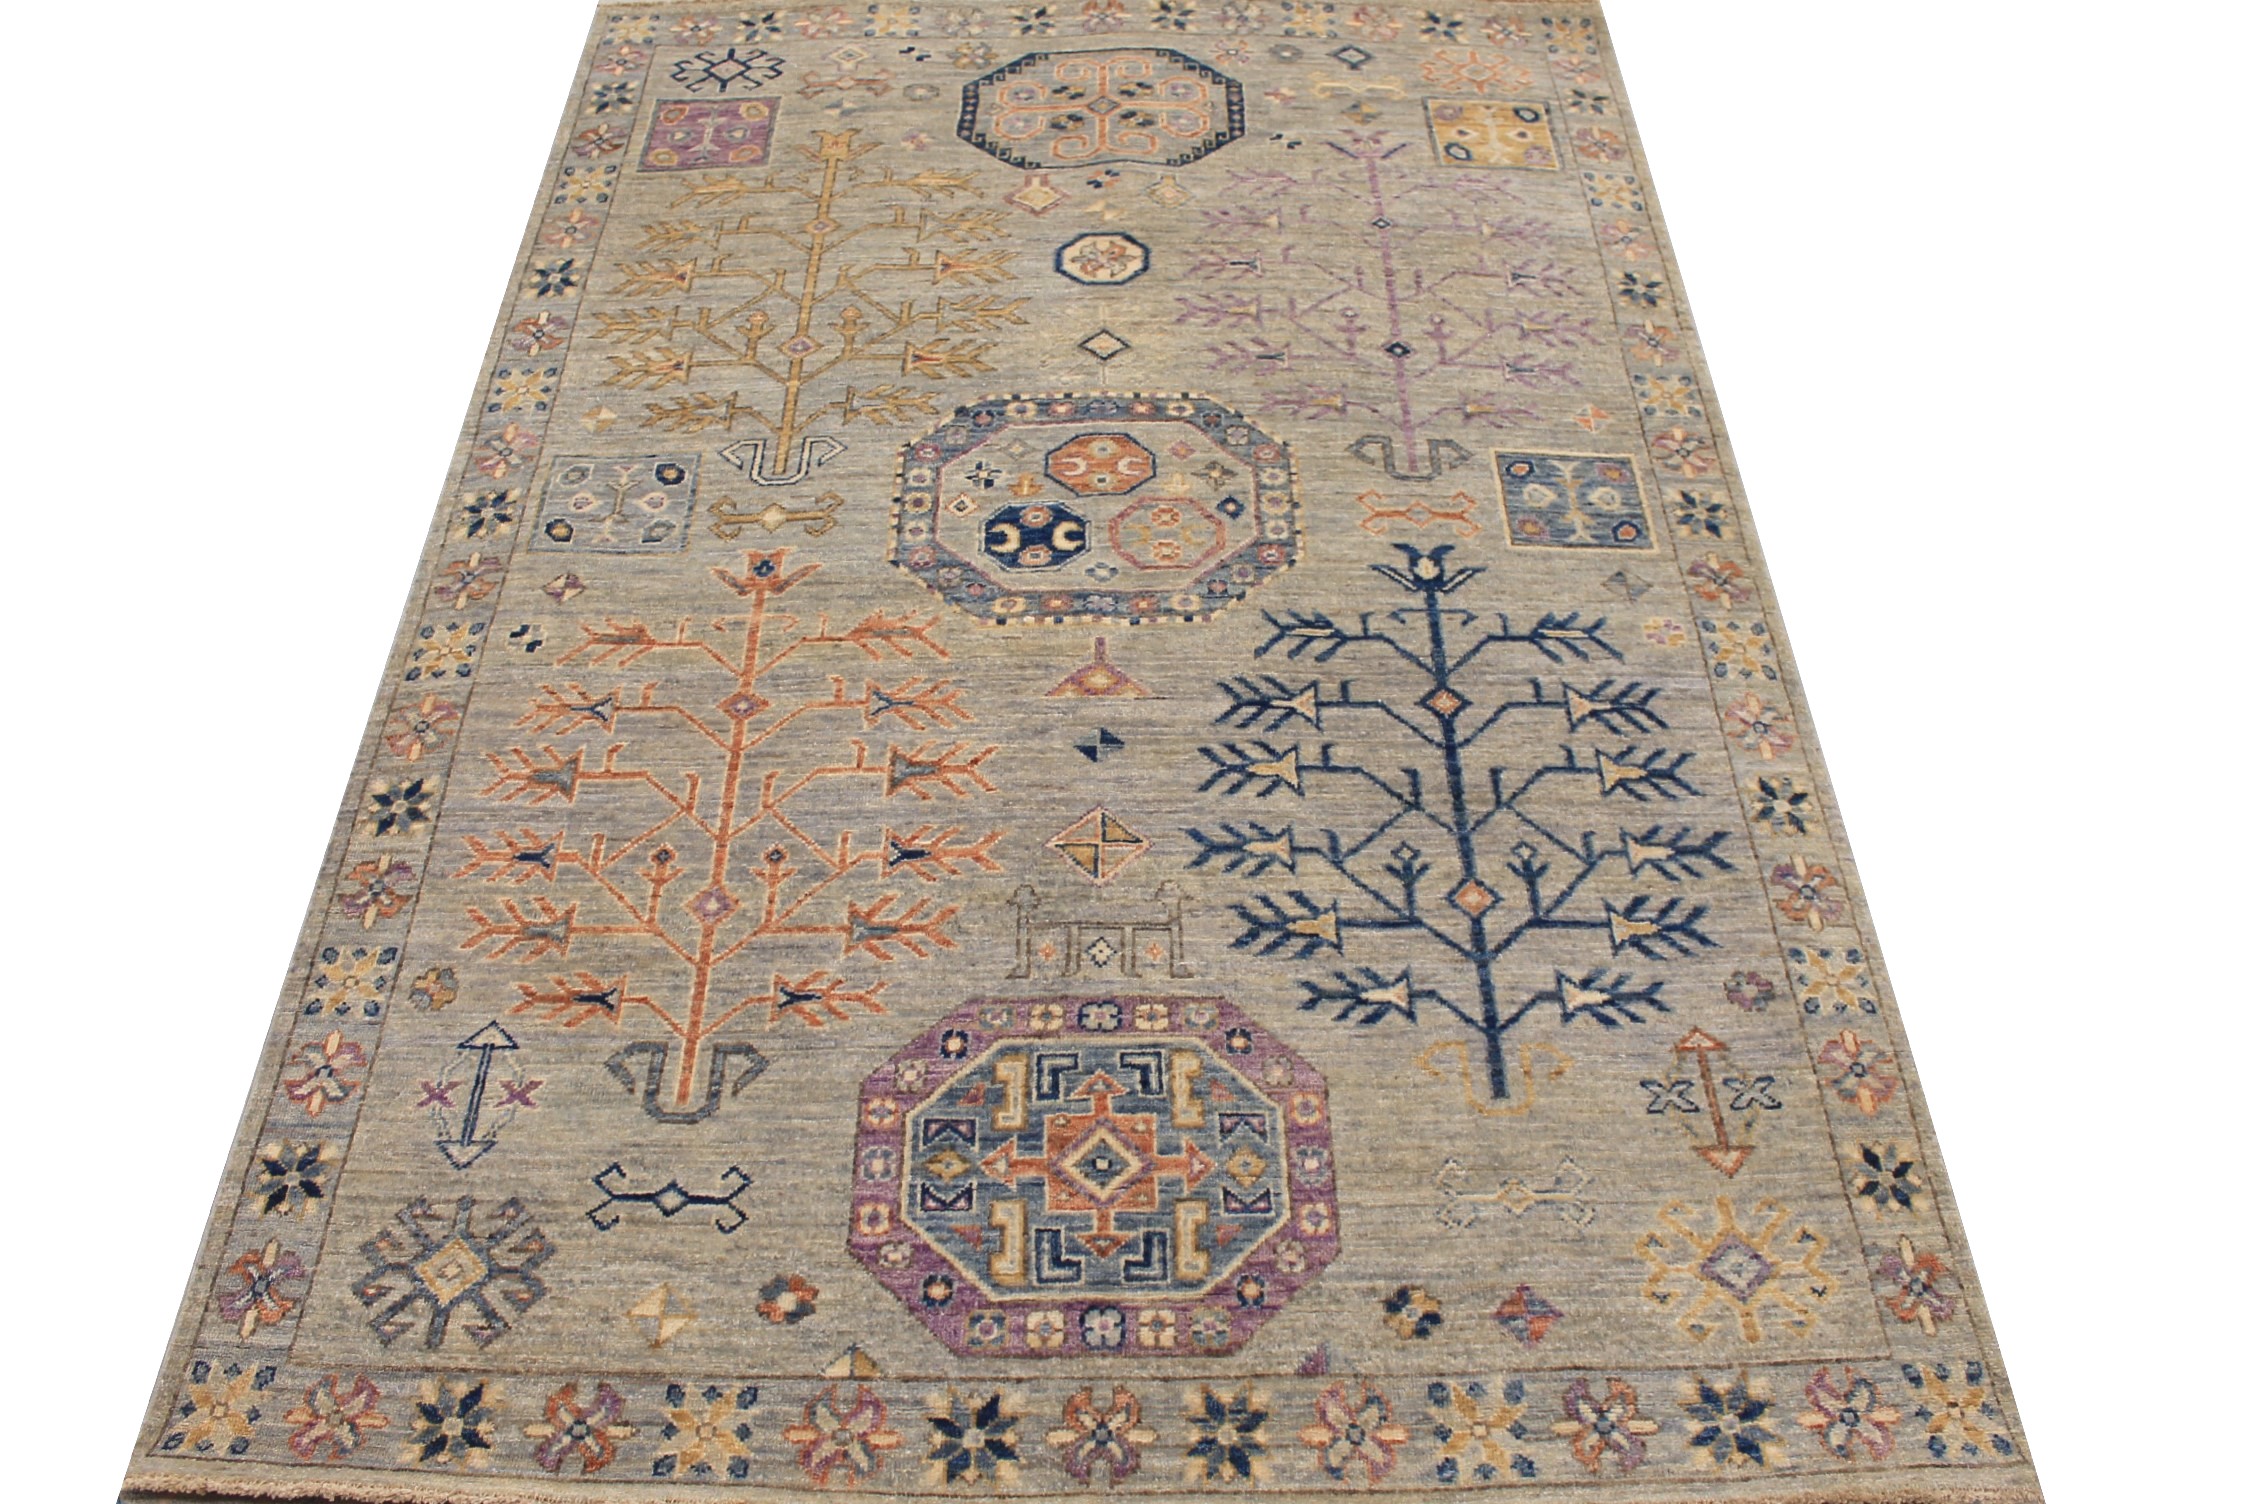 5x7/8 Aryana & Antique Revivals Hand Knotted Wool Area Rug - MR026072